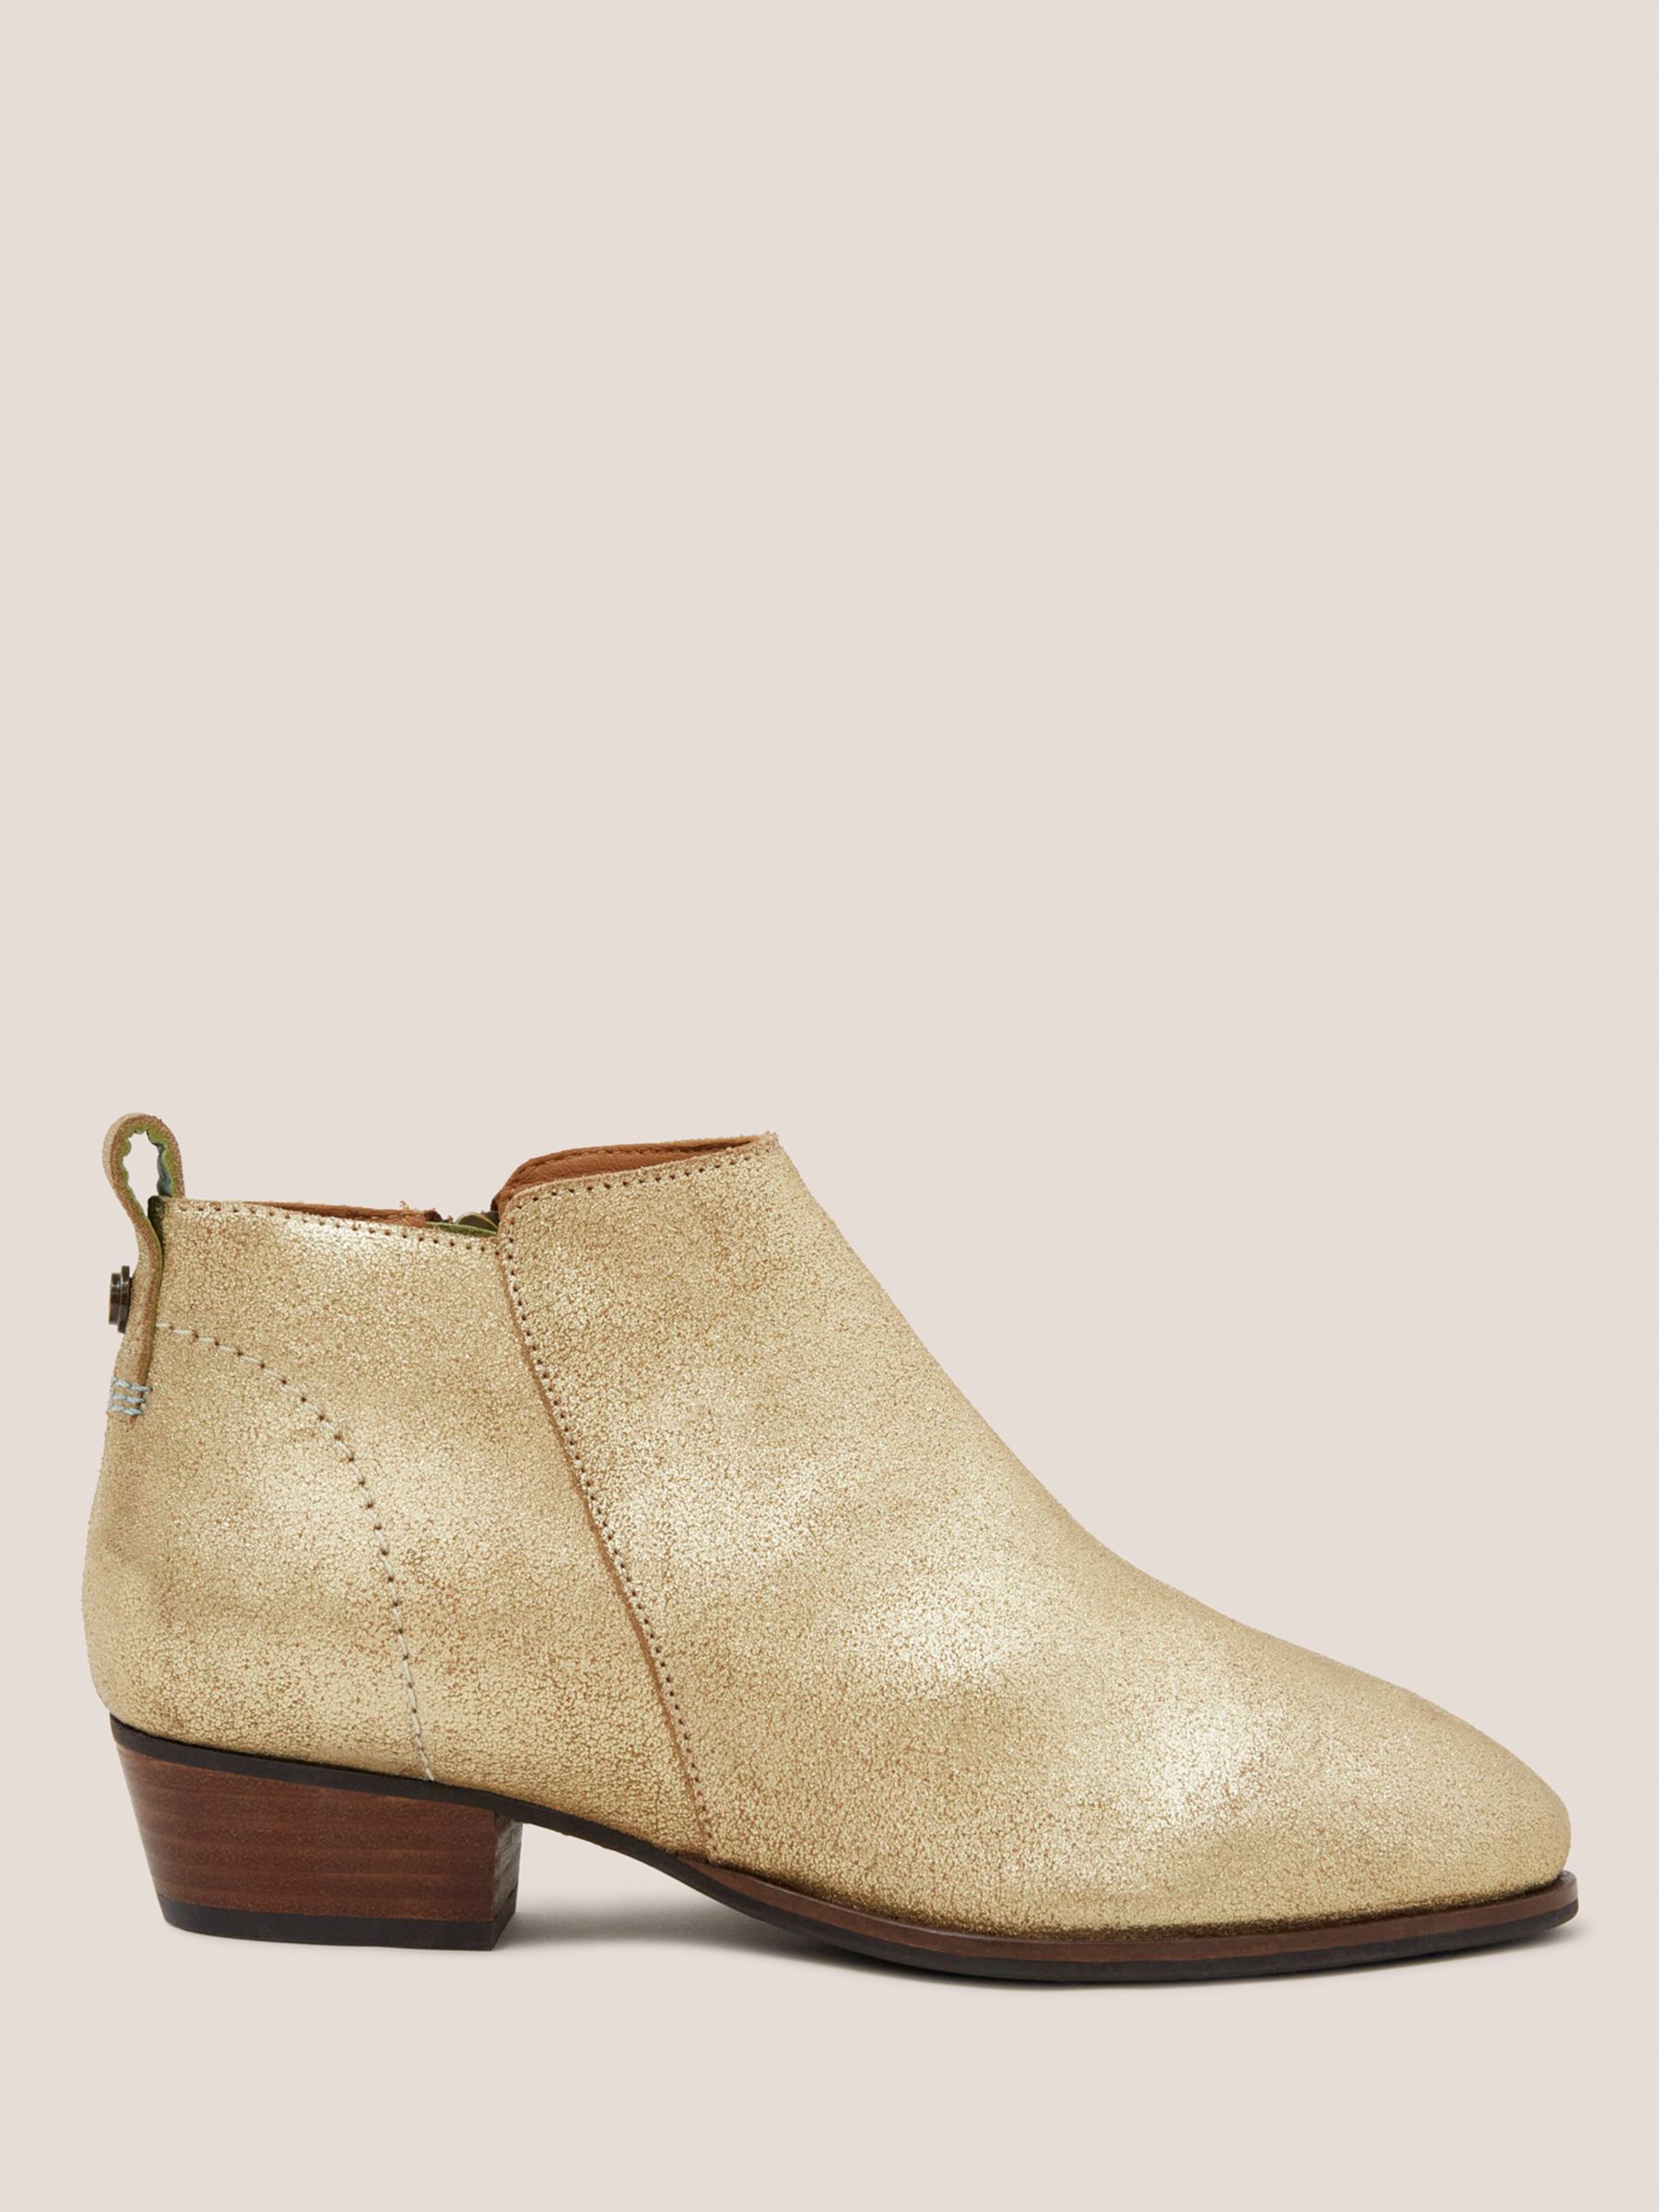 White Stuff Willow Leather Shoe Boots, Gold at John Lewis & Partners